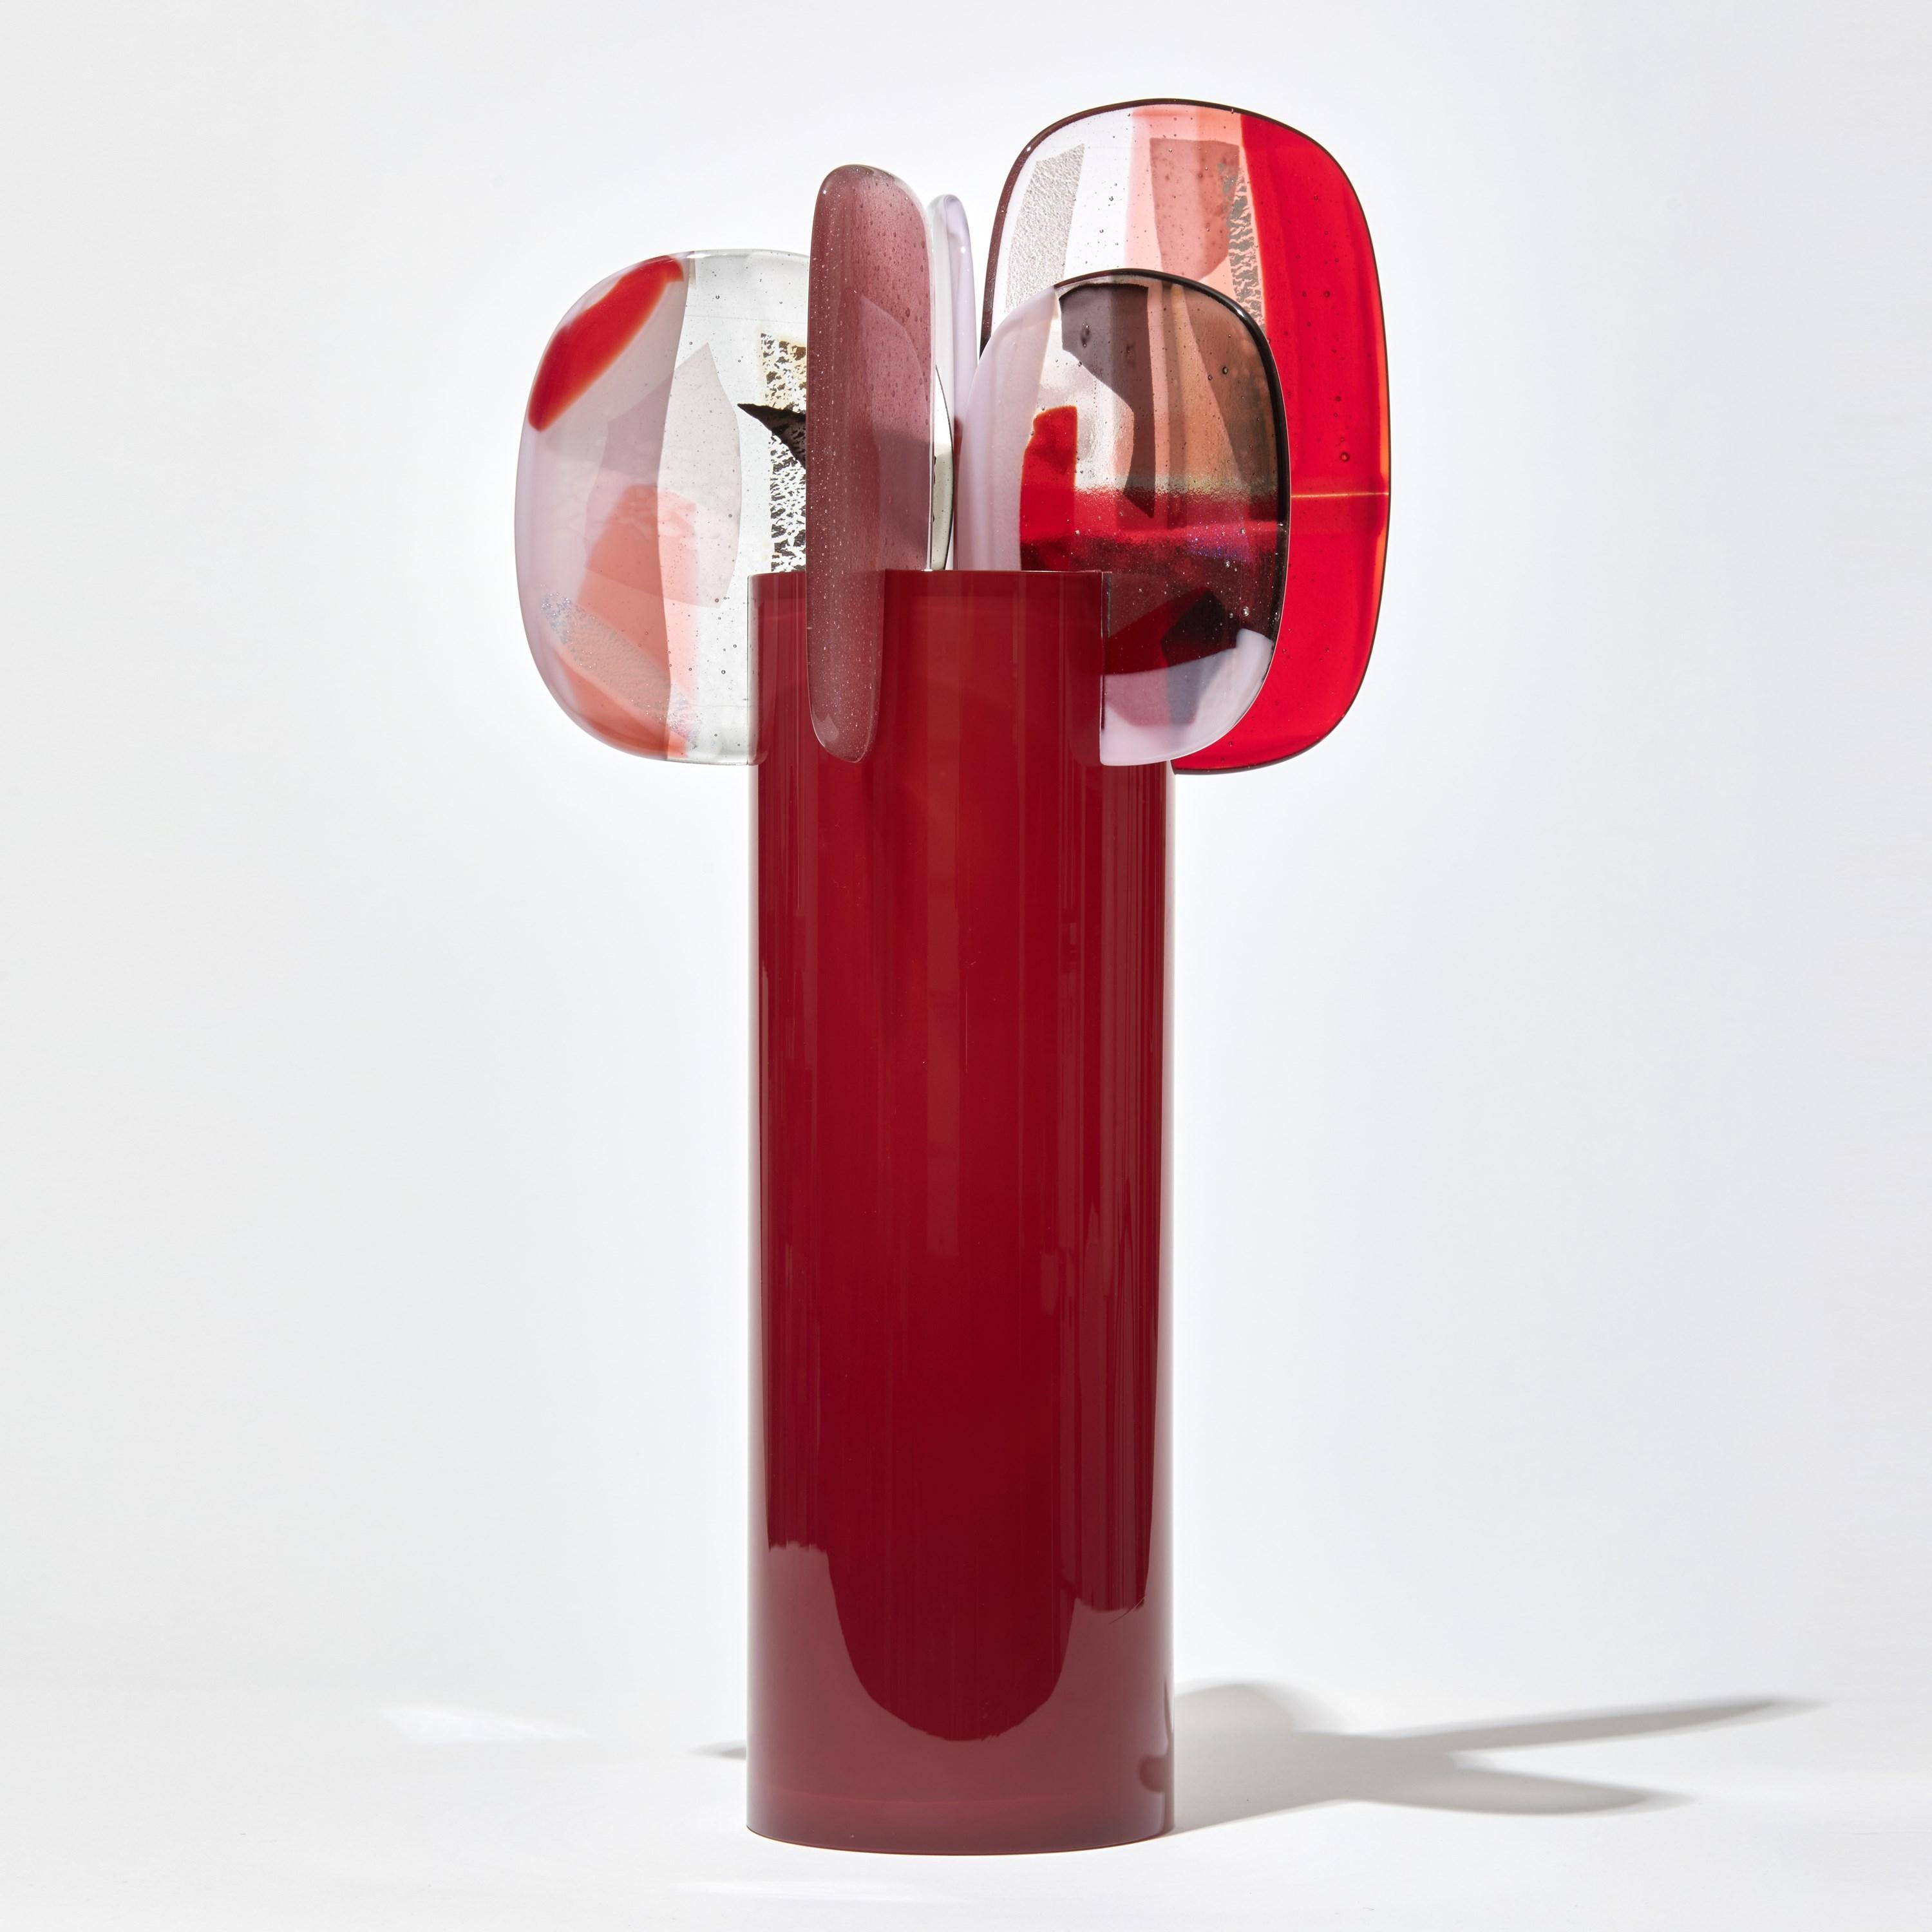 'Paradise 04 in Ruby' is a unique glass sculpture created using hybrid hand-made glass techniques by the British artist Amy Cushing. Combining mouth blown glass with kiln formed glass, each piece within the collection displays a multiple of highly